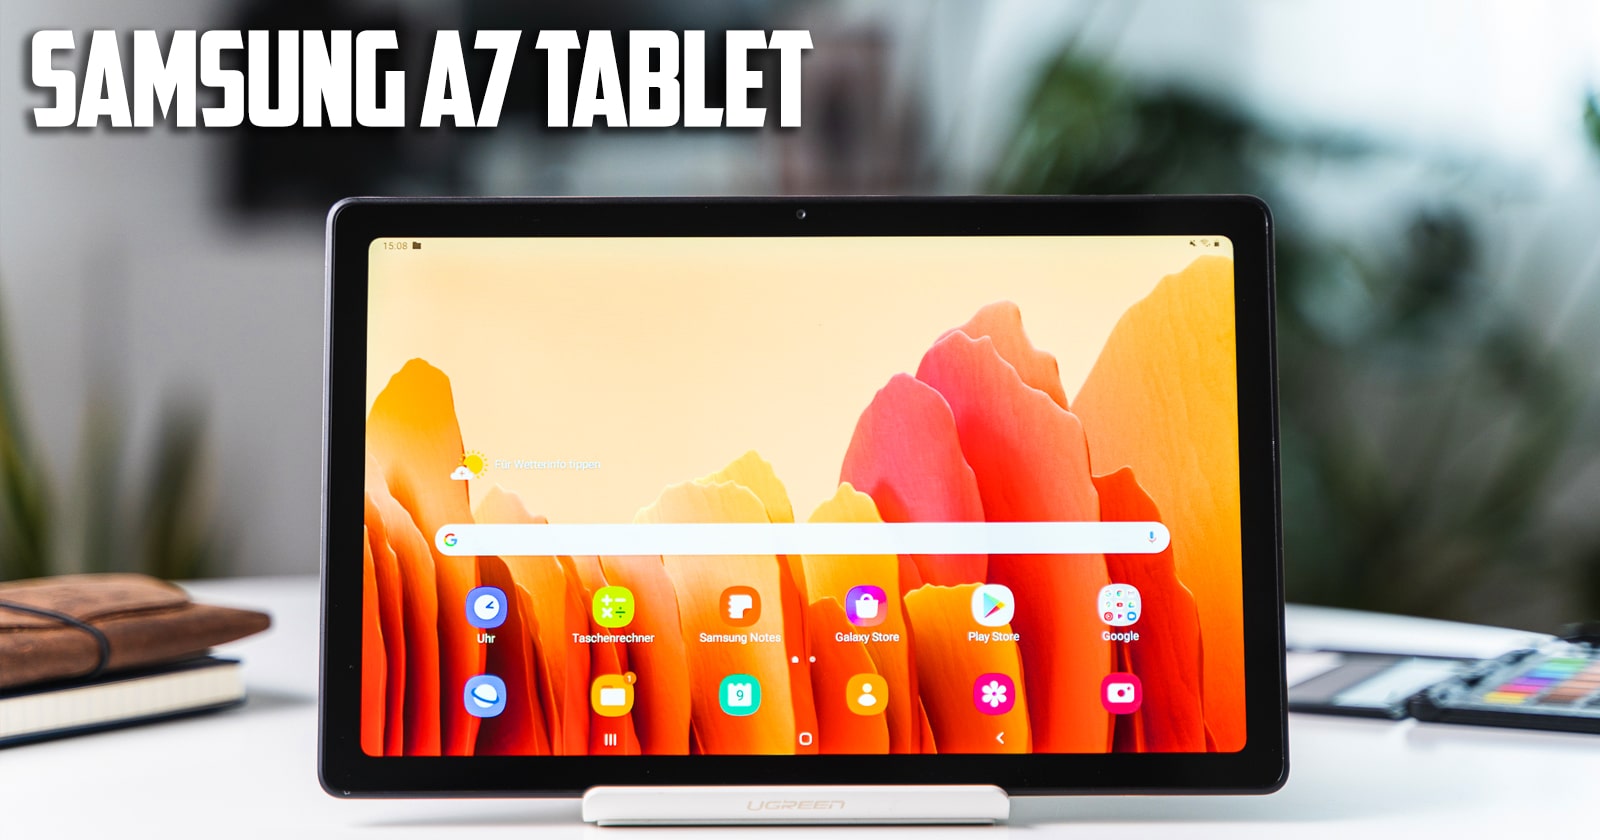 What Is the Difference Between Samsung A7 and S7 Tablets?